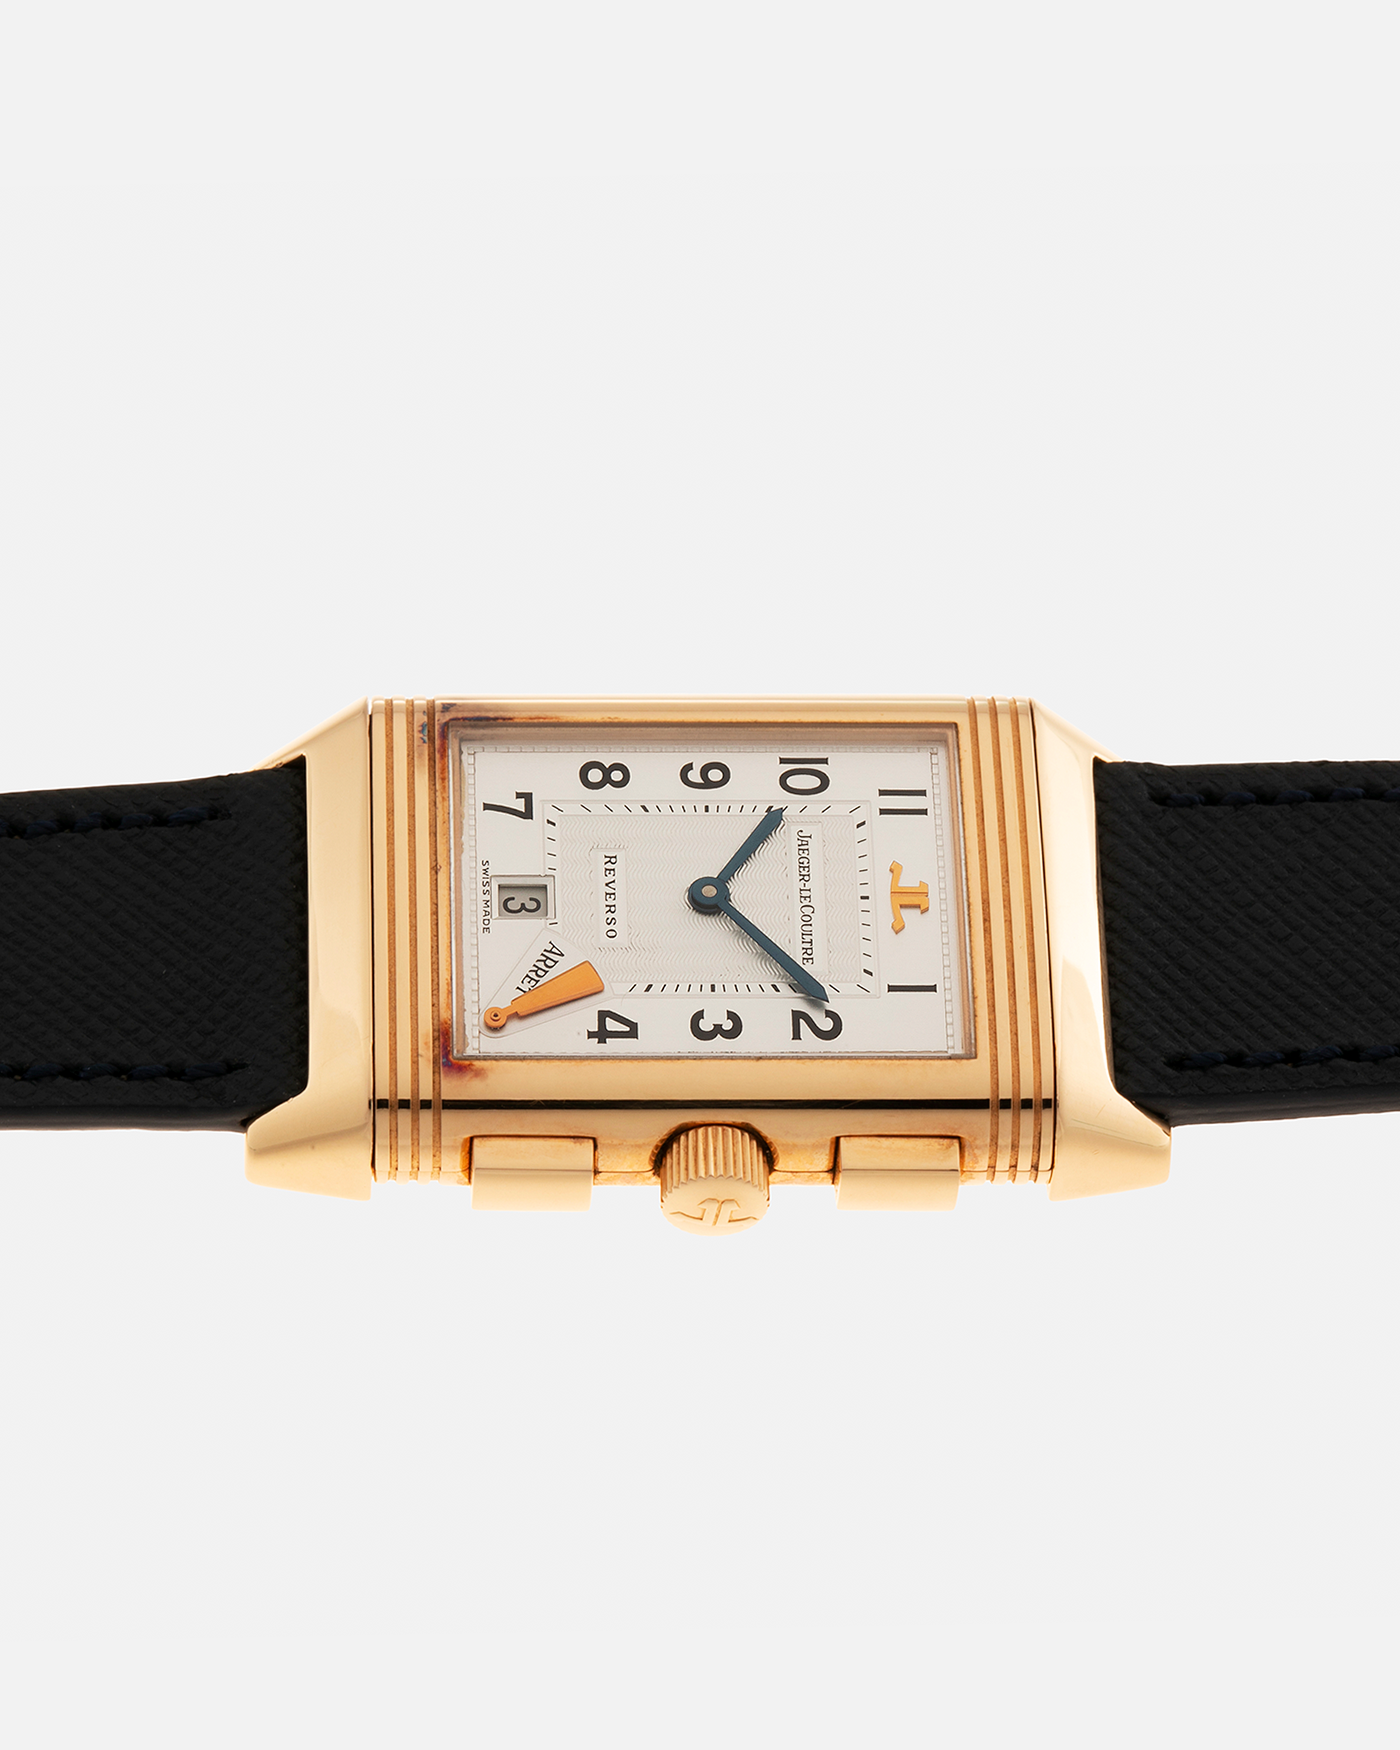 Brand: Jaeger LeCoultre Year: 1996 Model: Reverso Chronographe Retrograde, Limited to 500 pieces Reference: 270.2.69 Material: 18-carat Rose Gold Movement: Jaeger LeCoultre Cal. 829, Manual-Wind Case Dimensions: 42mm x 26mm x 9.5mm Lug Width: 19mm Strap: Molequin Navy Blue Textured Calf with Signed 18-carat Rose Gold Deployant Clasp